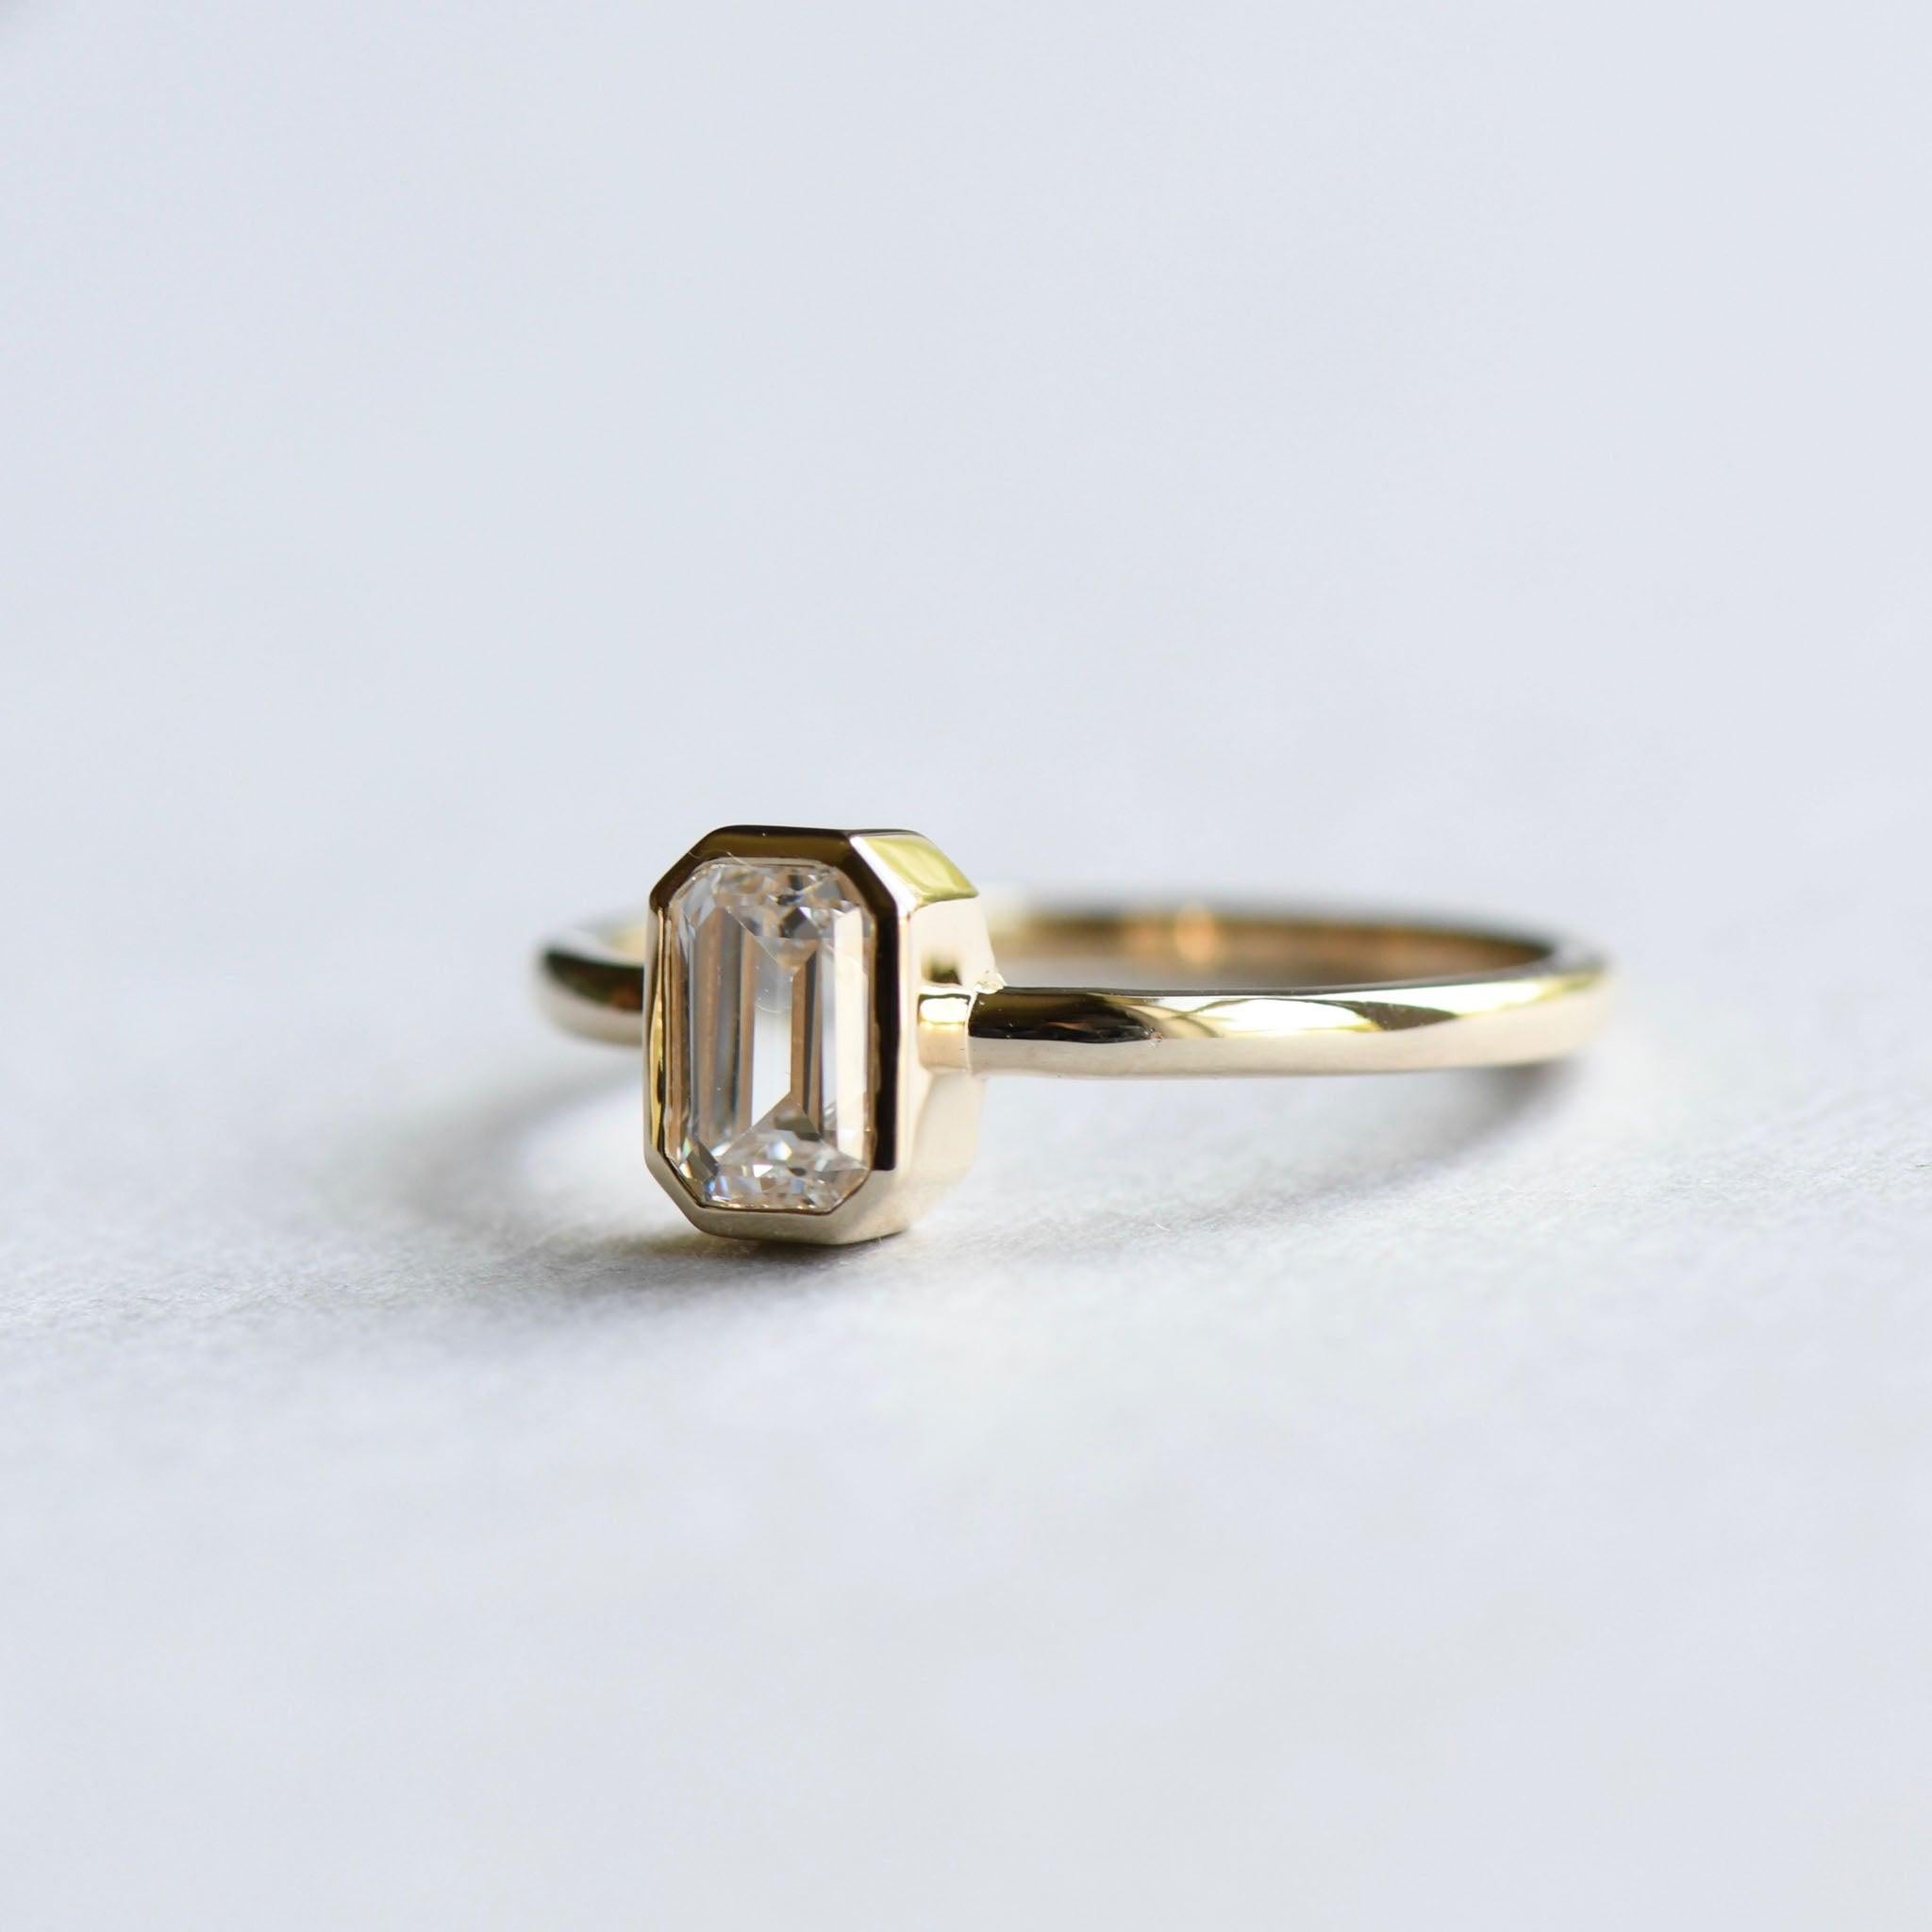 For Sale:  14 Karat Gold with 0.5 Carat Emerald Cut Diamond Solitaire Ring, Engagement Ring 3